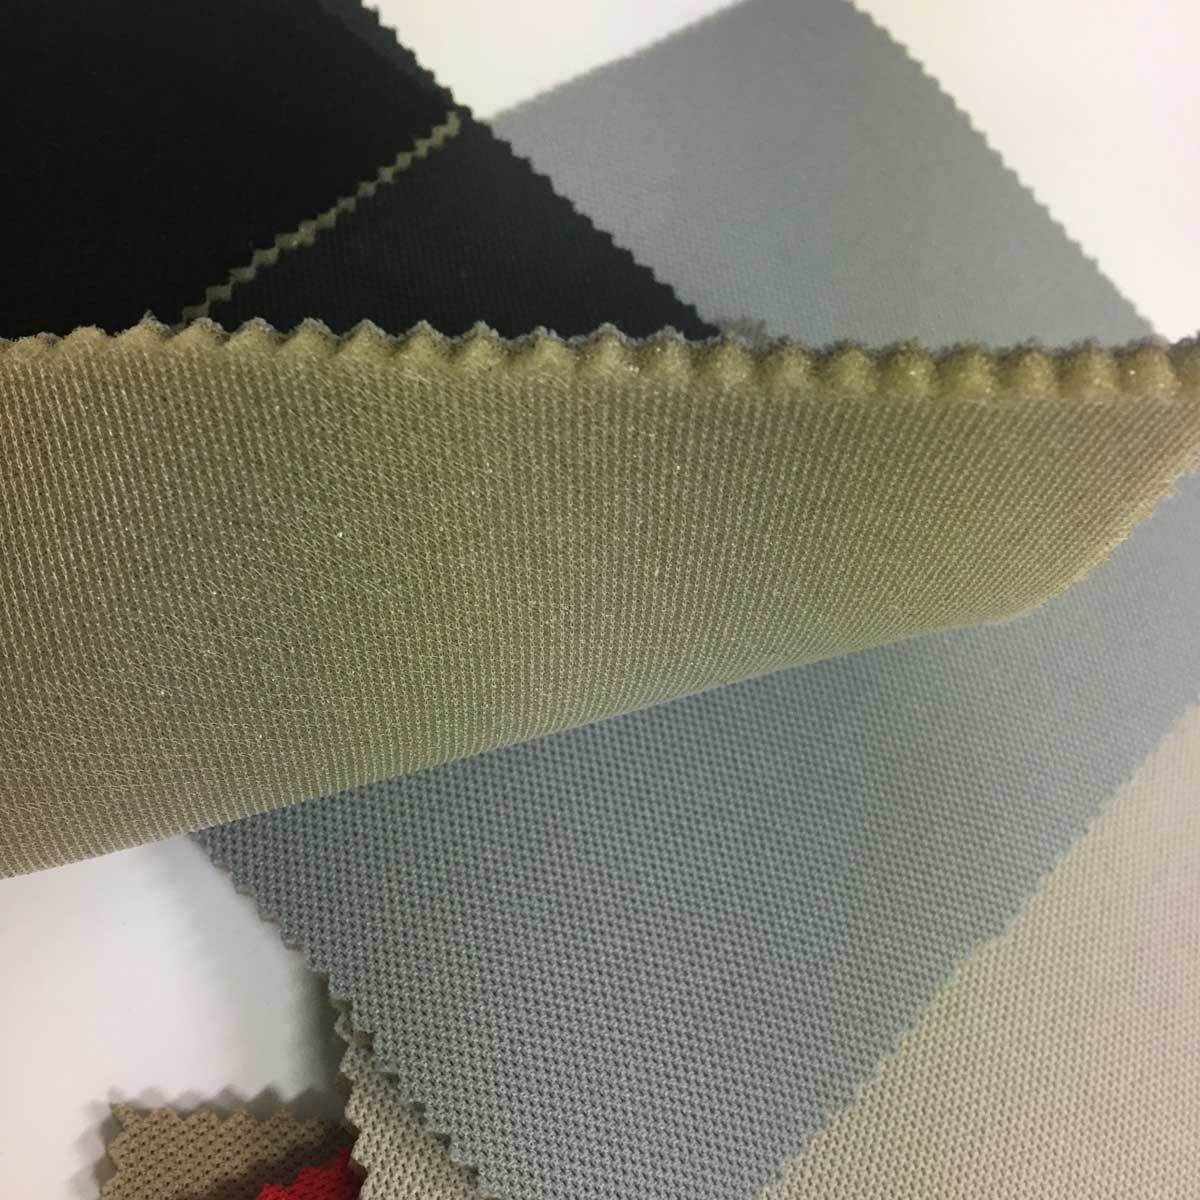 [ automobile interior material ] seat repair ceiling roof lining head liner # gray # back surface 5mm urethane trim ceiling trim for re tongue fireproof # sport knitted 